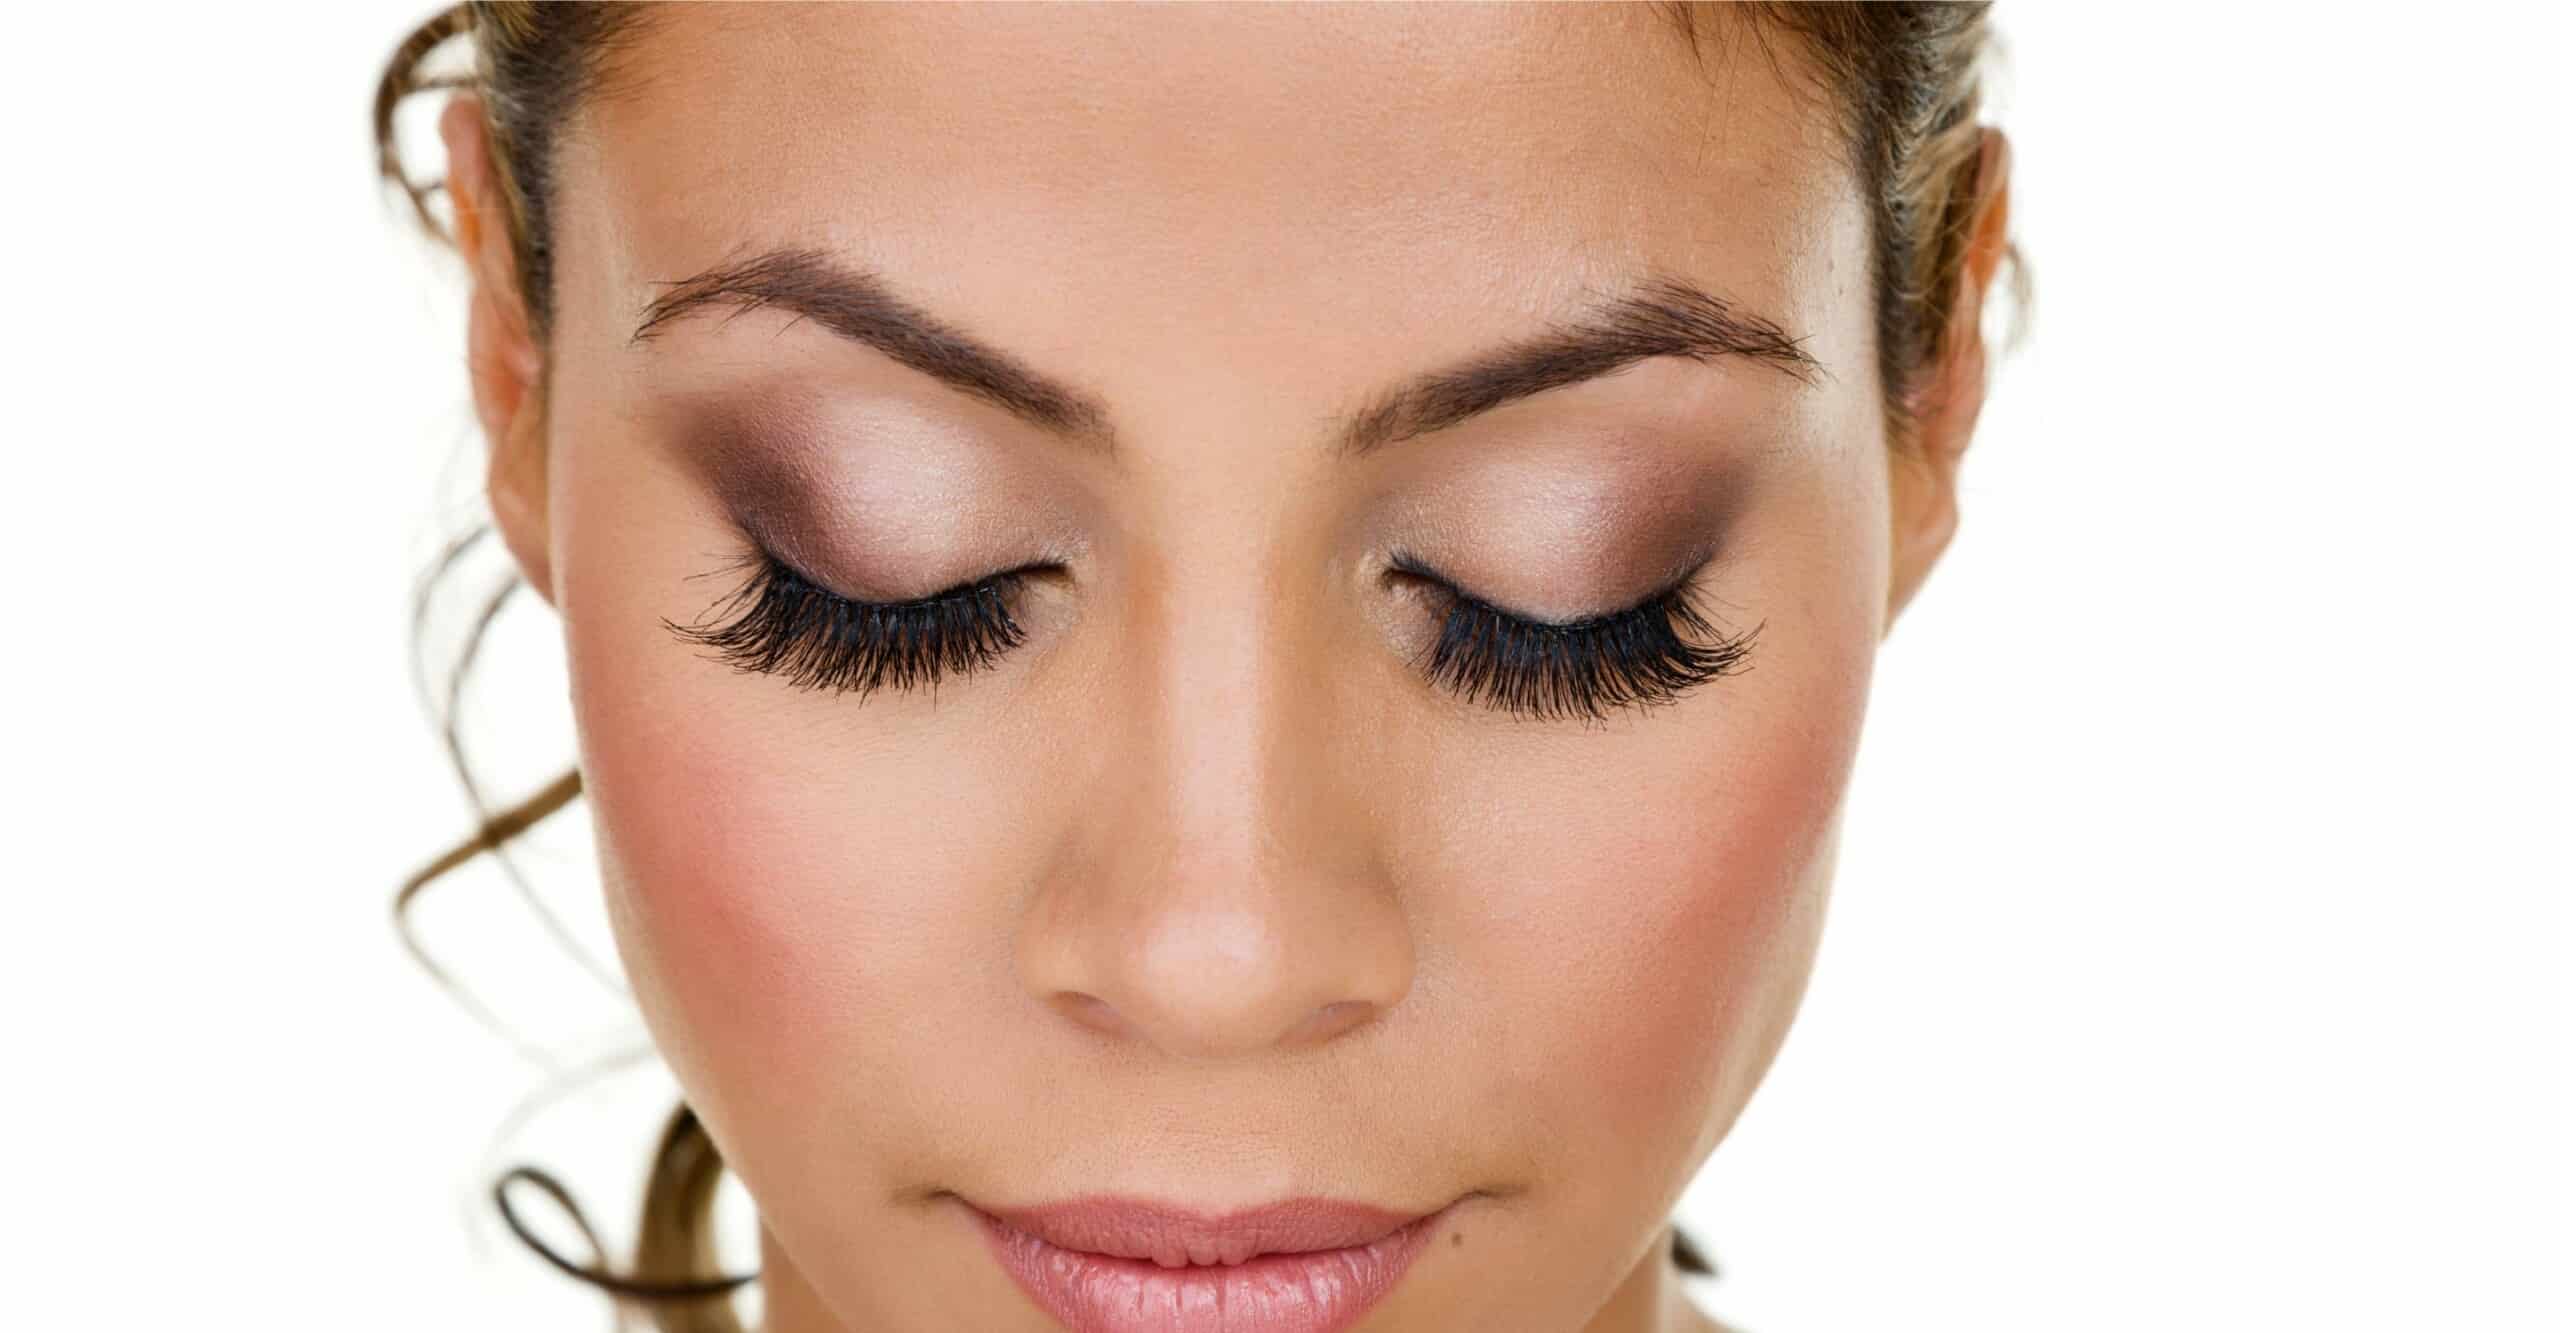 How Much Are Eyelash Extensions and Should I Try Them? - StyleSeat